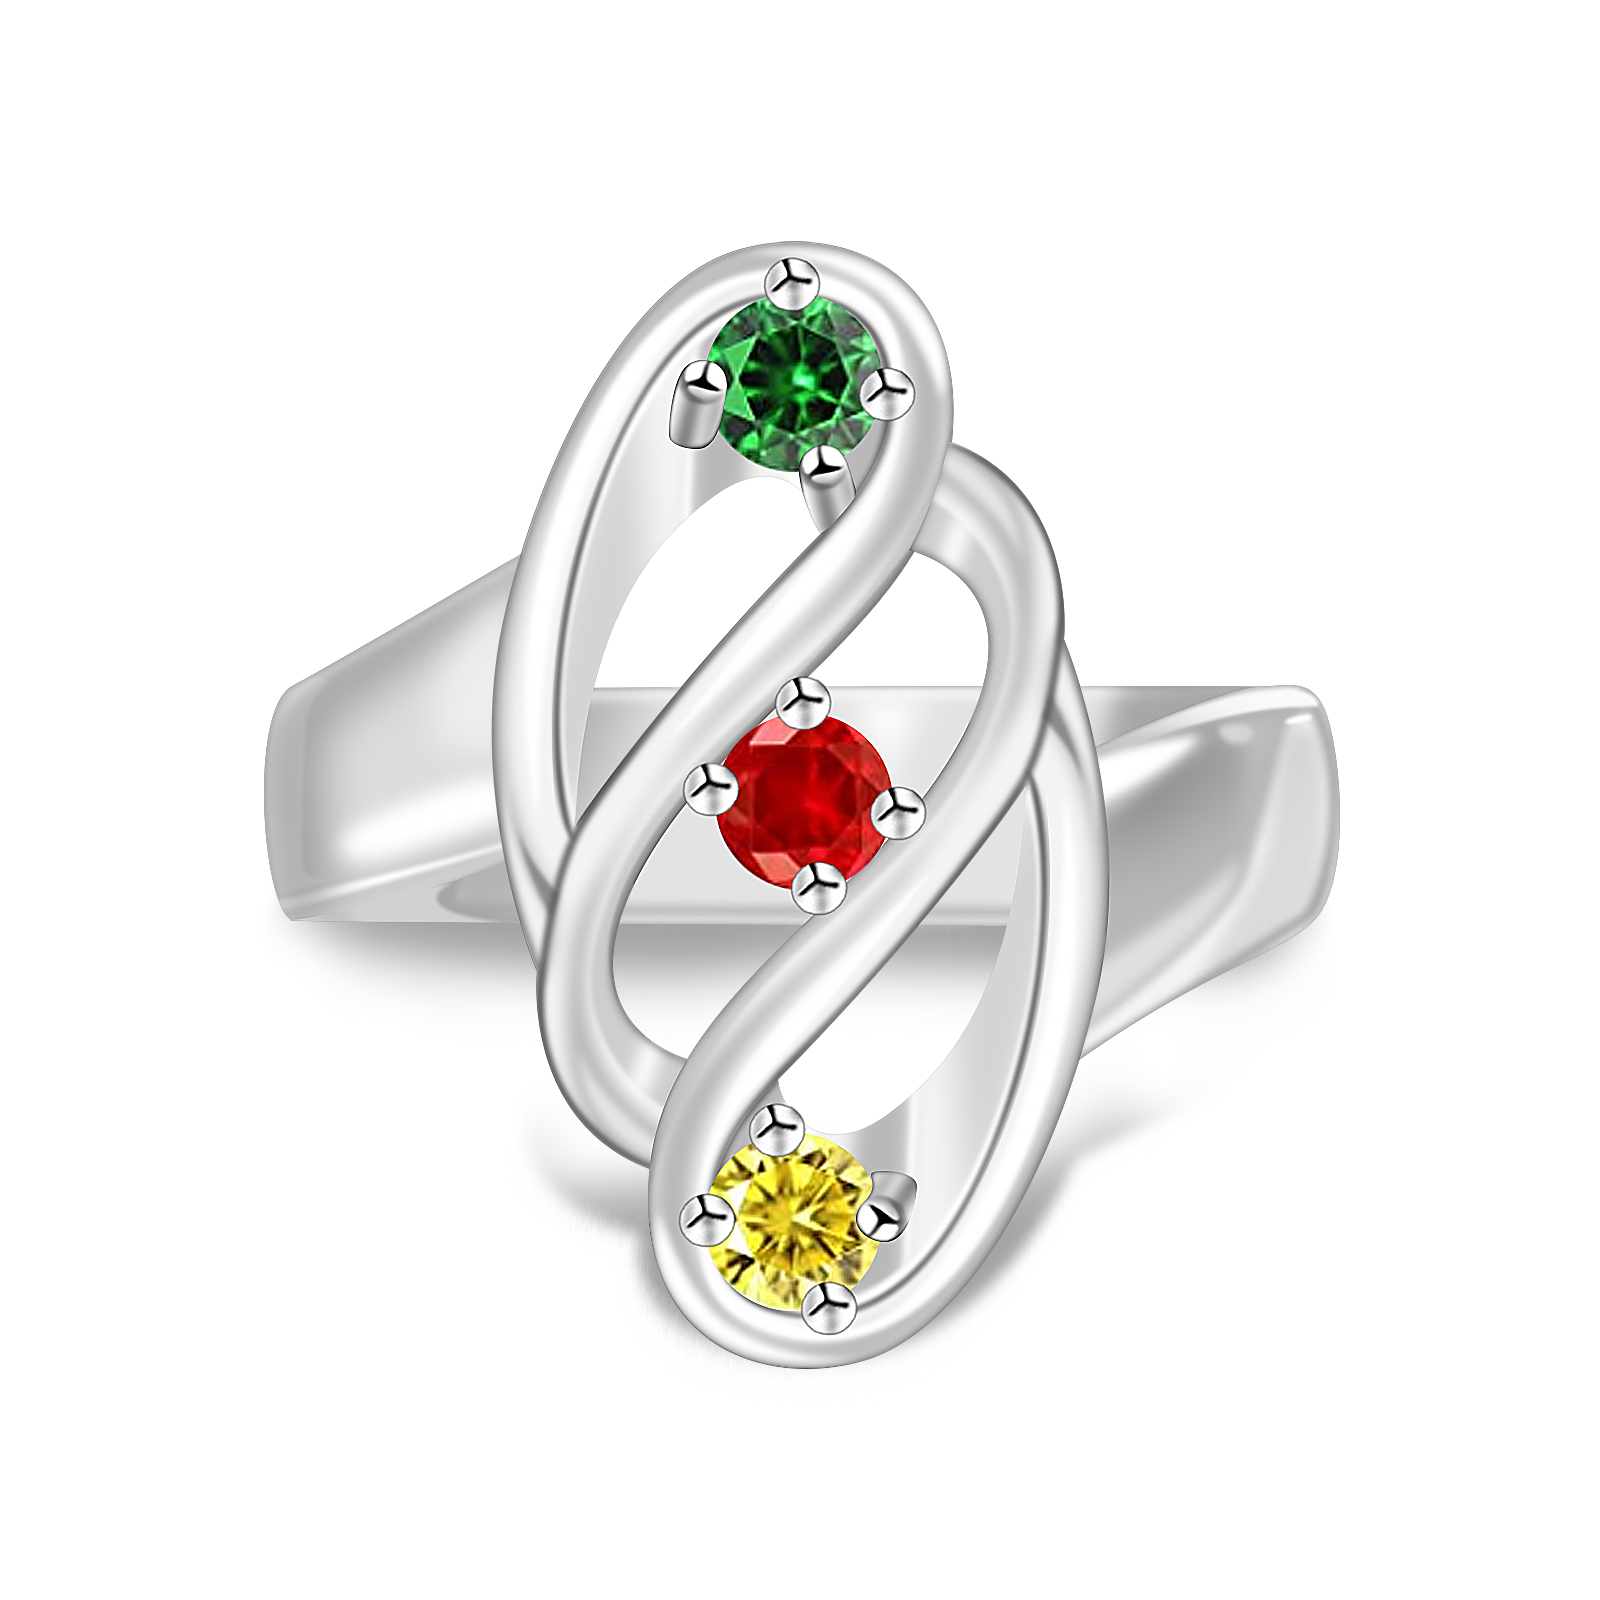 Personalized Mom‘s Ring with 1-3 Simulated Birthstones